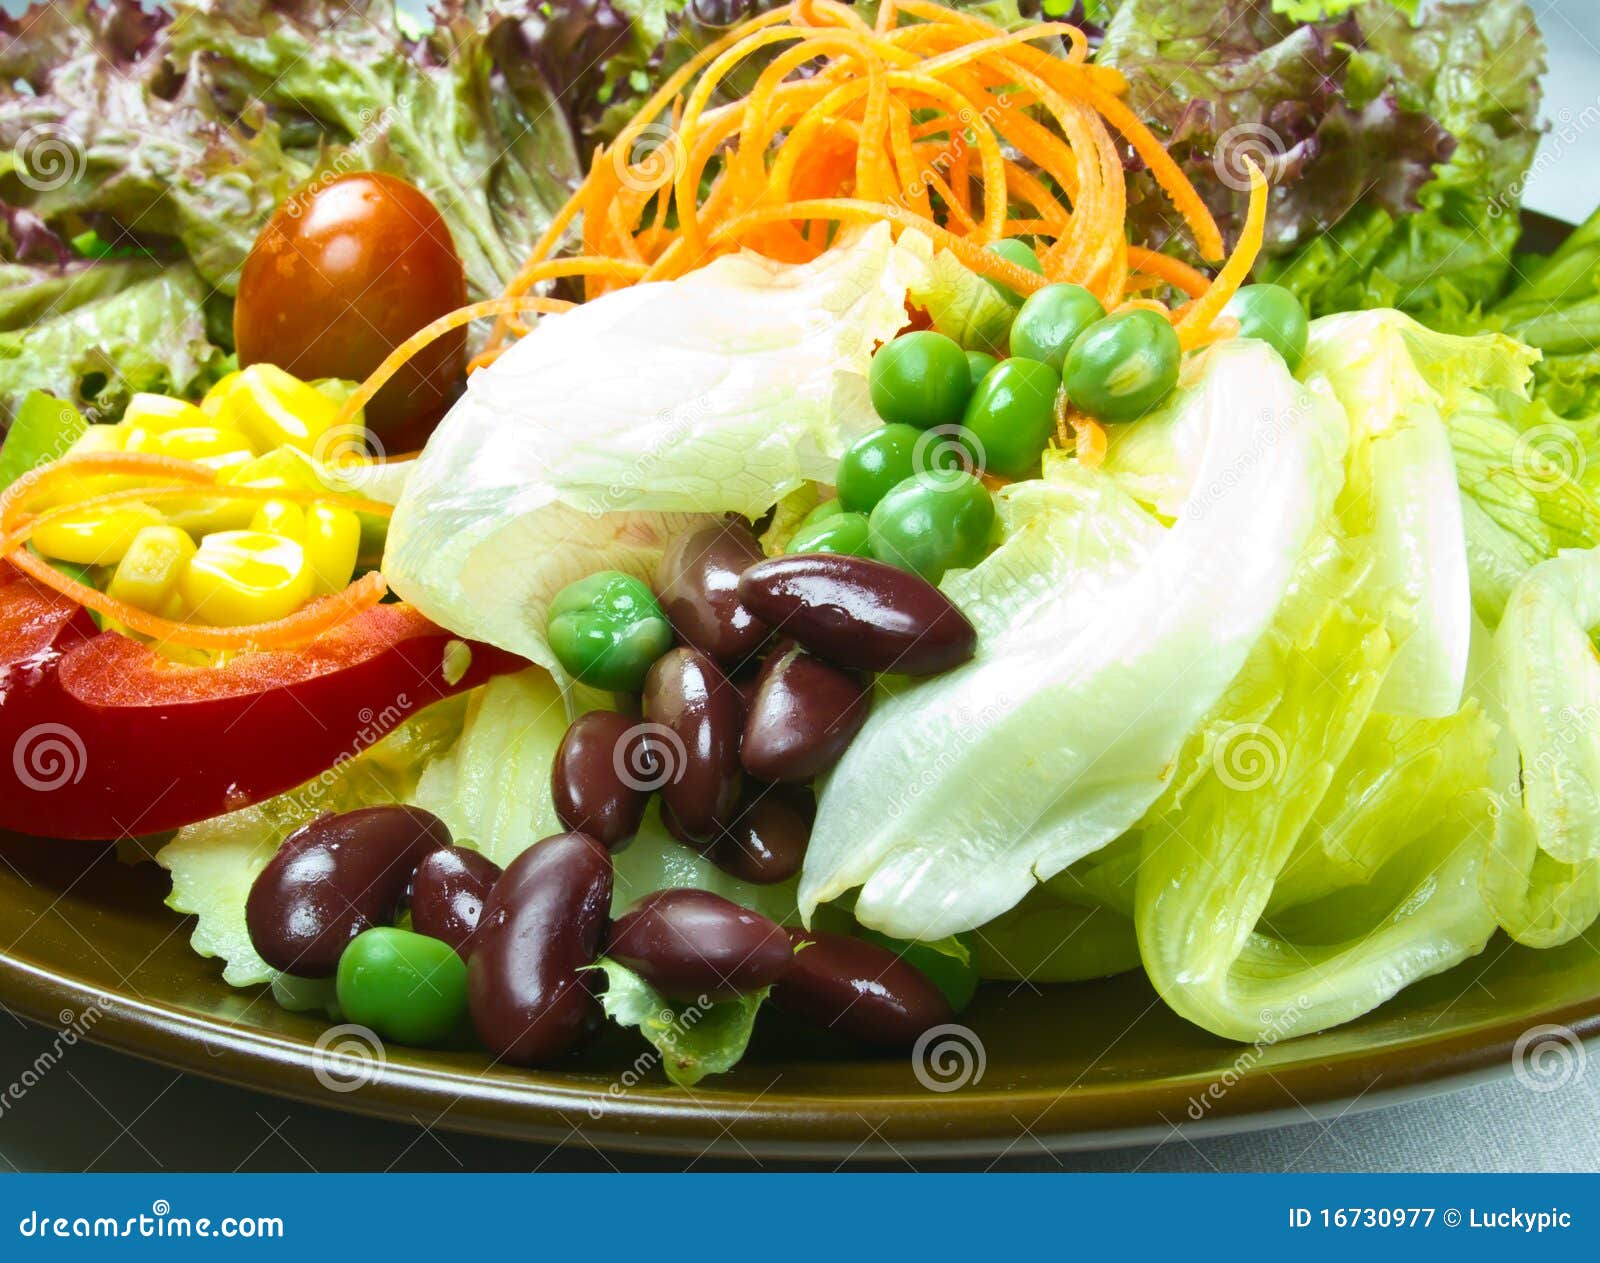 Salad on brown plate stock image. Image of meal, cucumber - 16730977